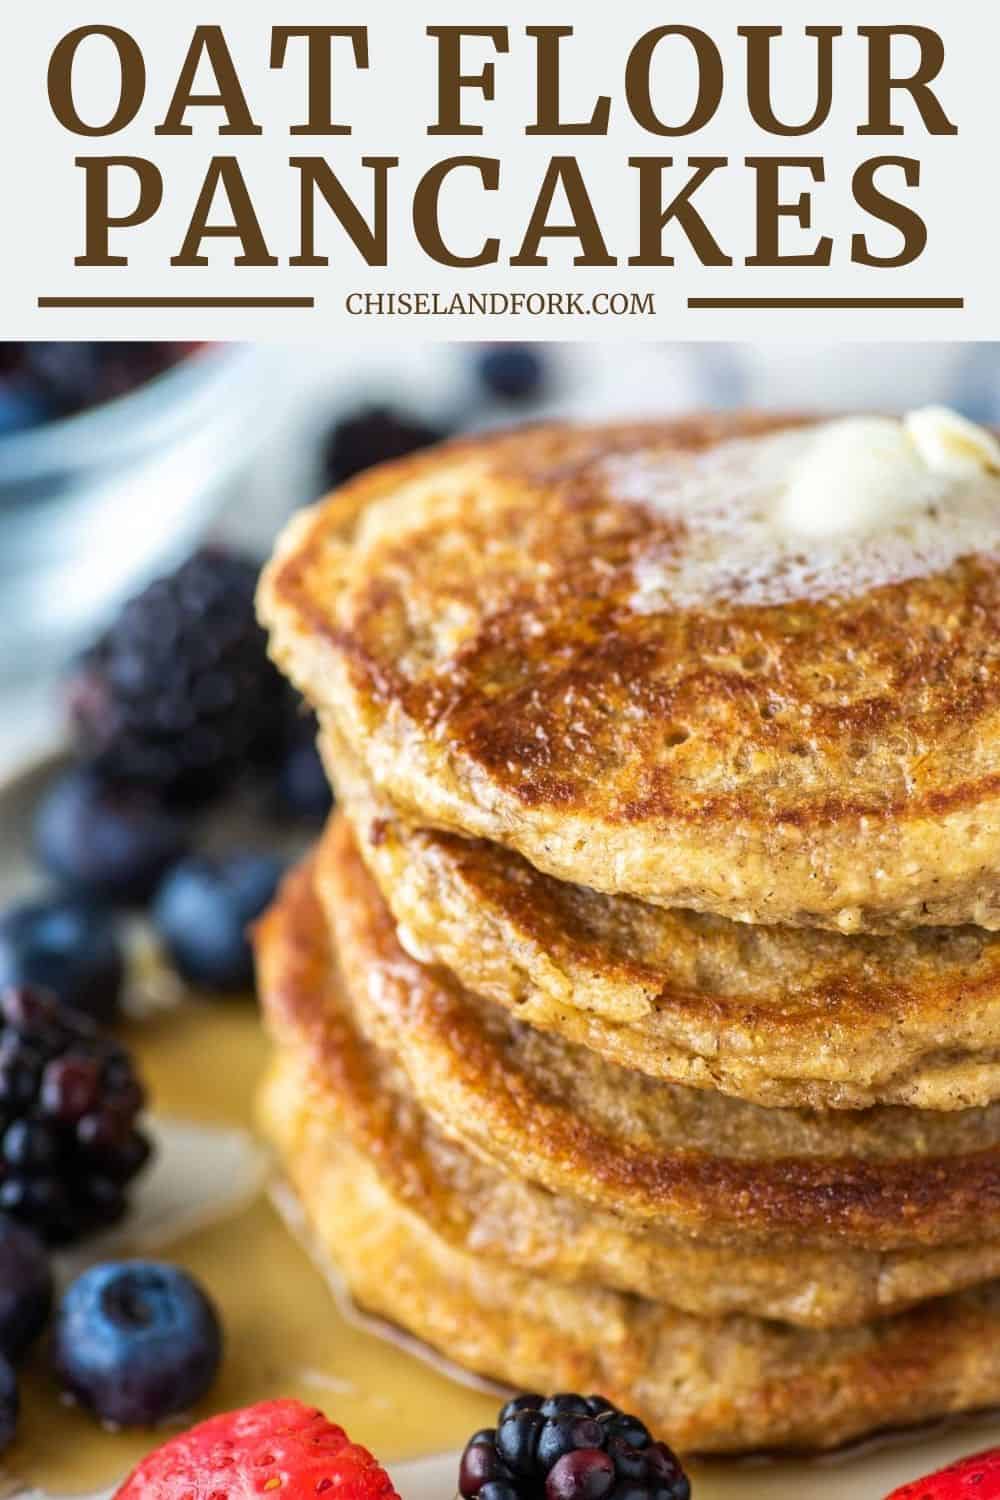 Oat Flour Pancakes Recipe - Gluten-Free and Low in Sugar - Chisel & Fork